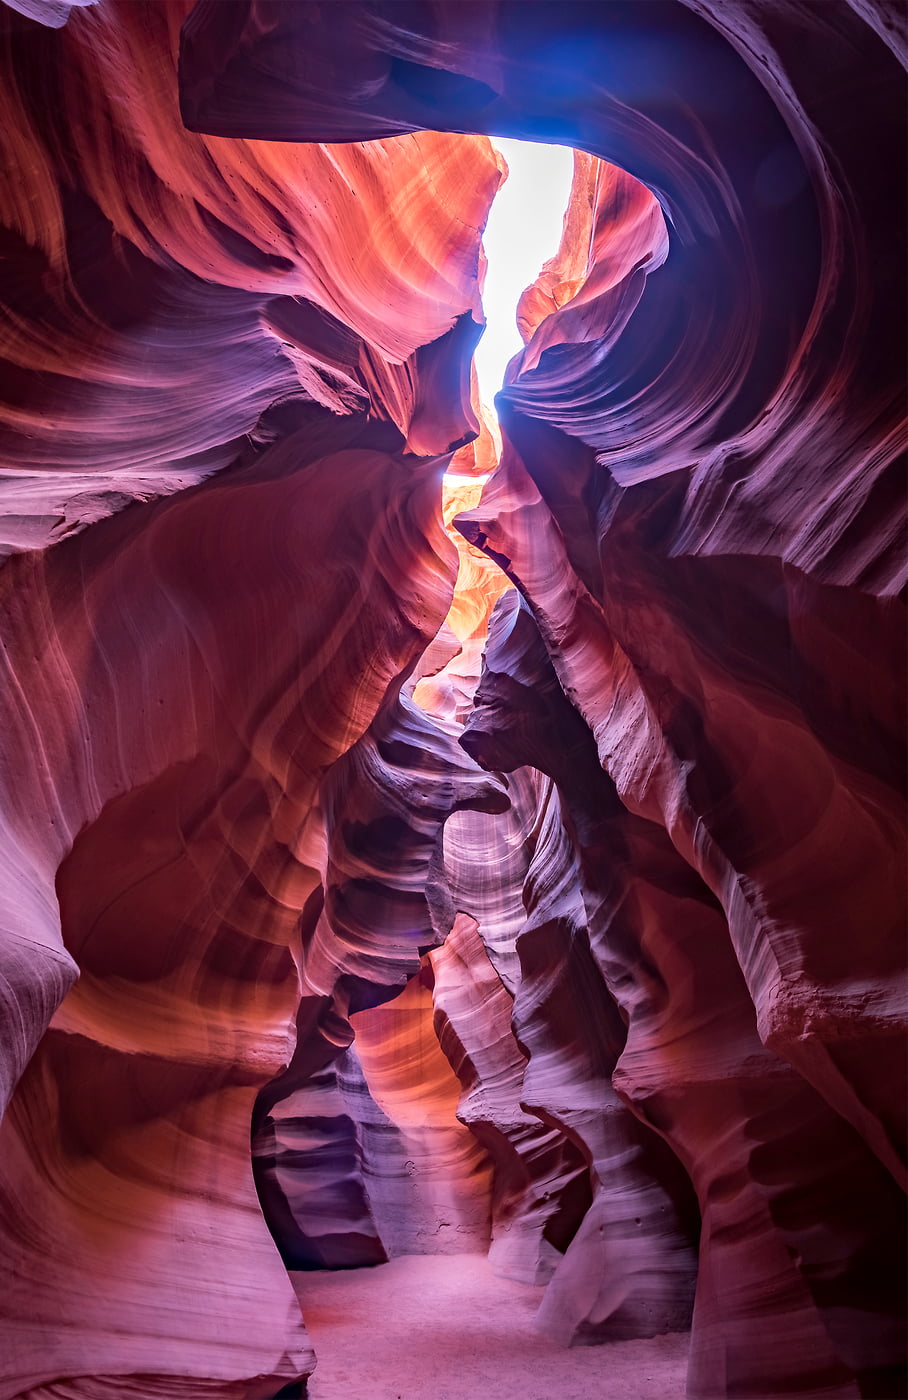 109 megapixels! A very high resolution, large-format VAST photo print of light coming into Antelope Canyon; nature photo created by Justin Katz in Arizona.